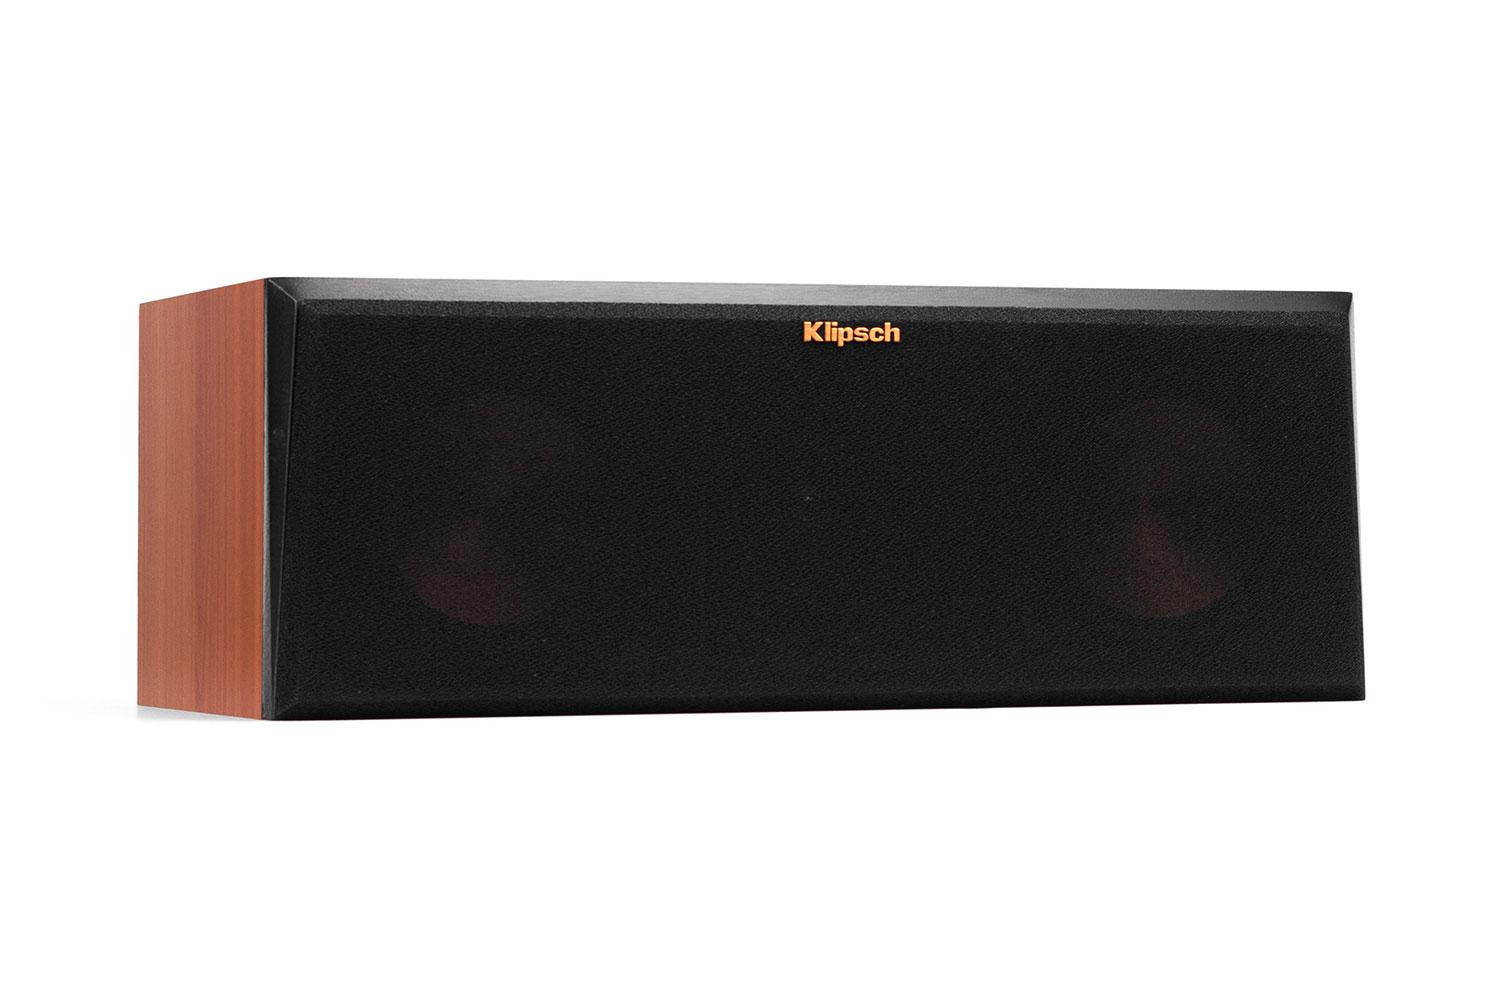 klipsch reference premier speaker system debuts at ces 2015 250c angle grille cherry